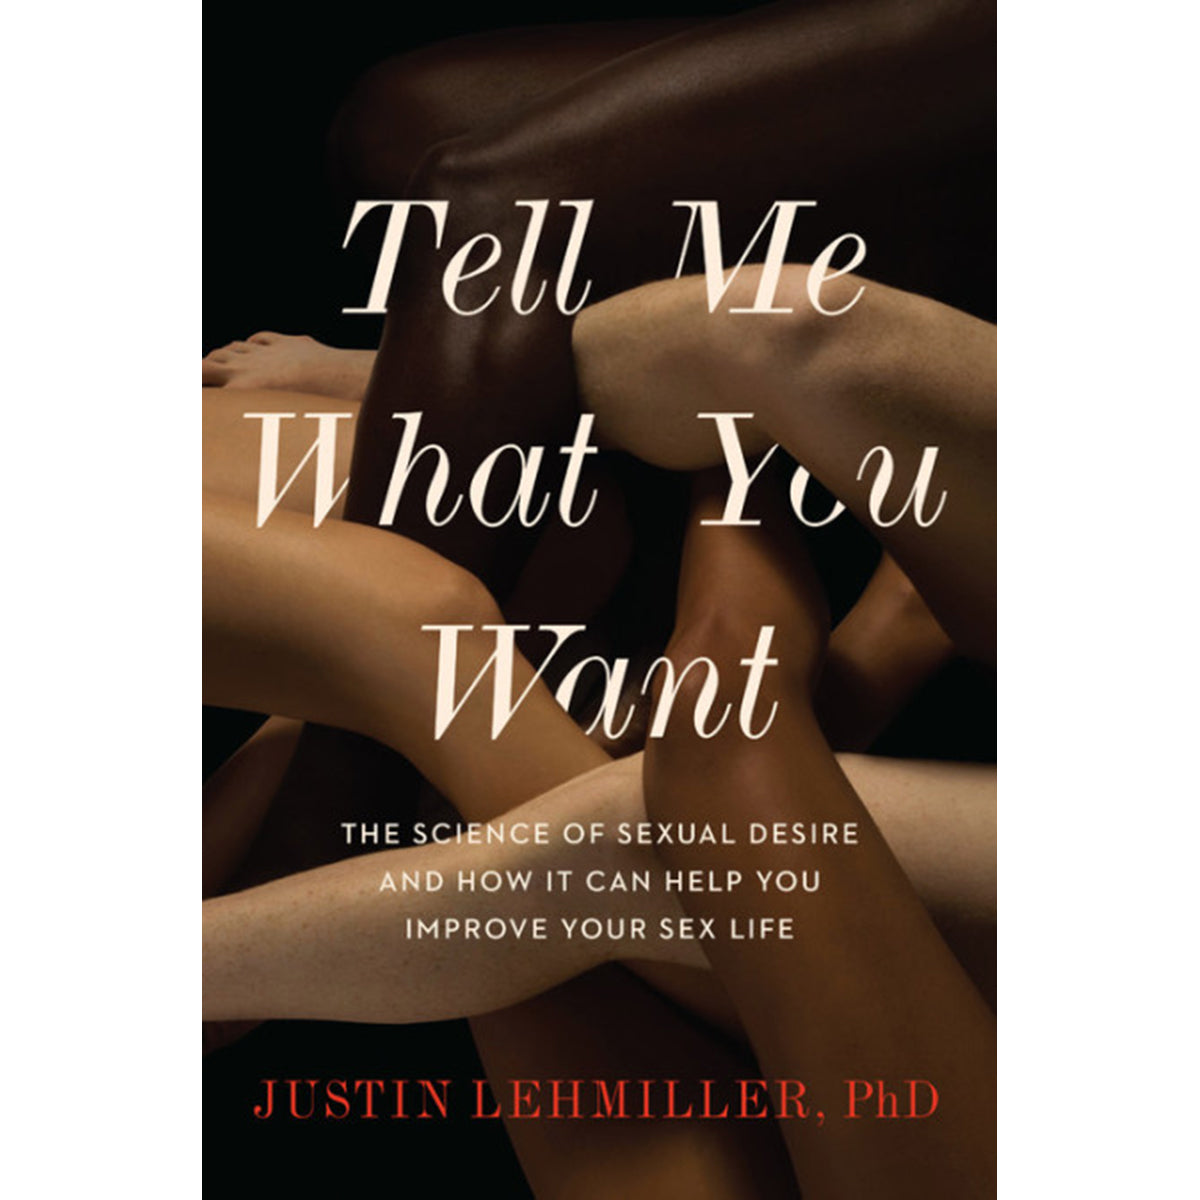 Tell Me What You Want - The Science of Sexual Desire